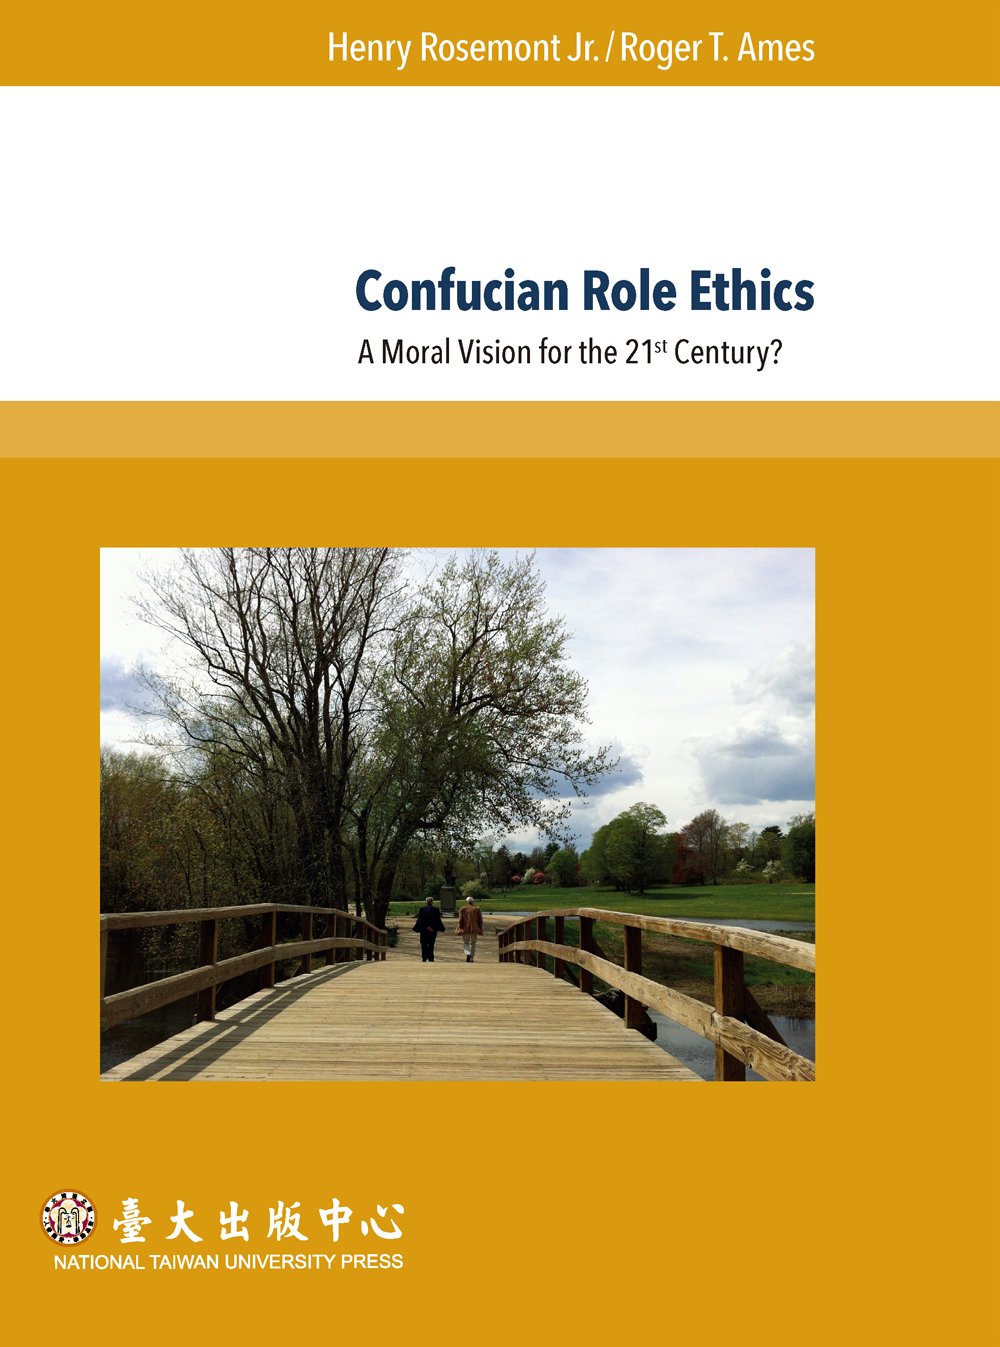 Confucian Role Ethics: A Moral Vision for the 21st Century?